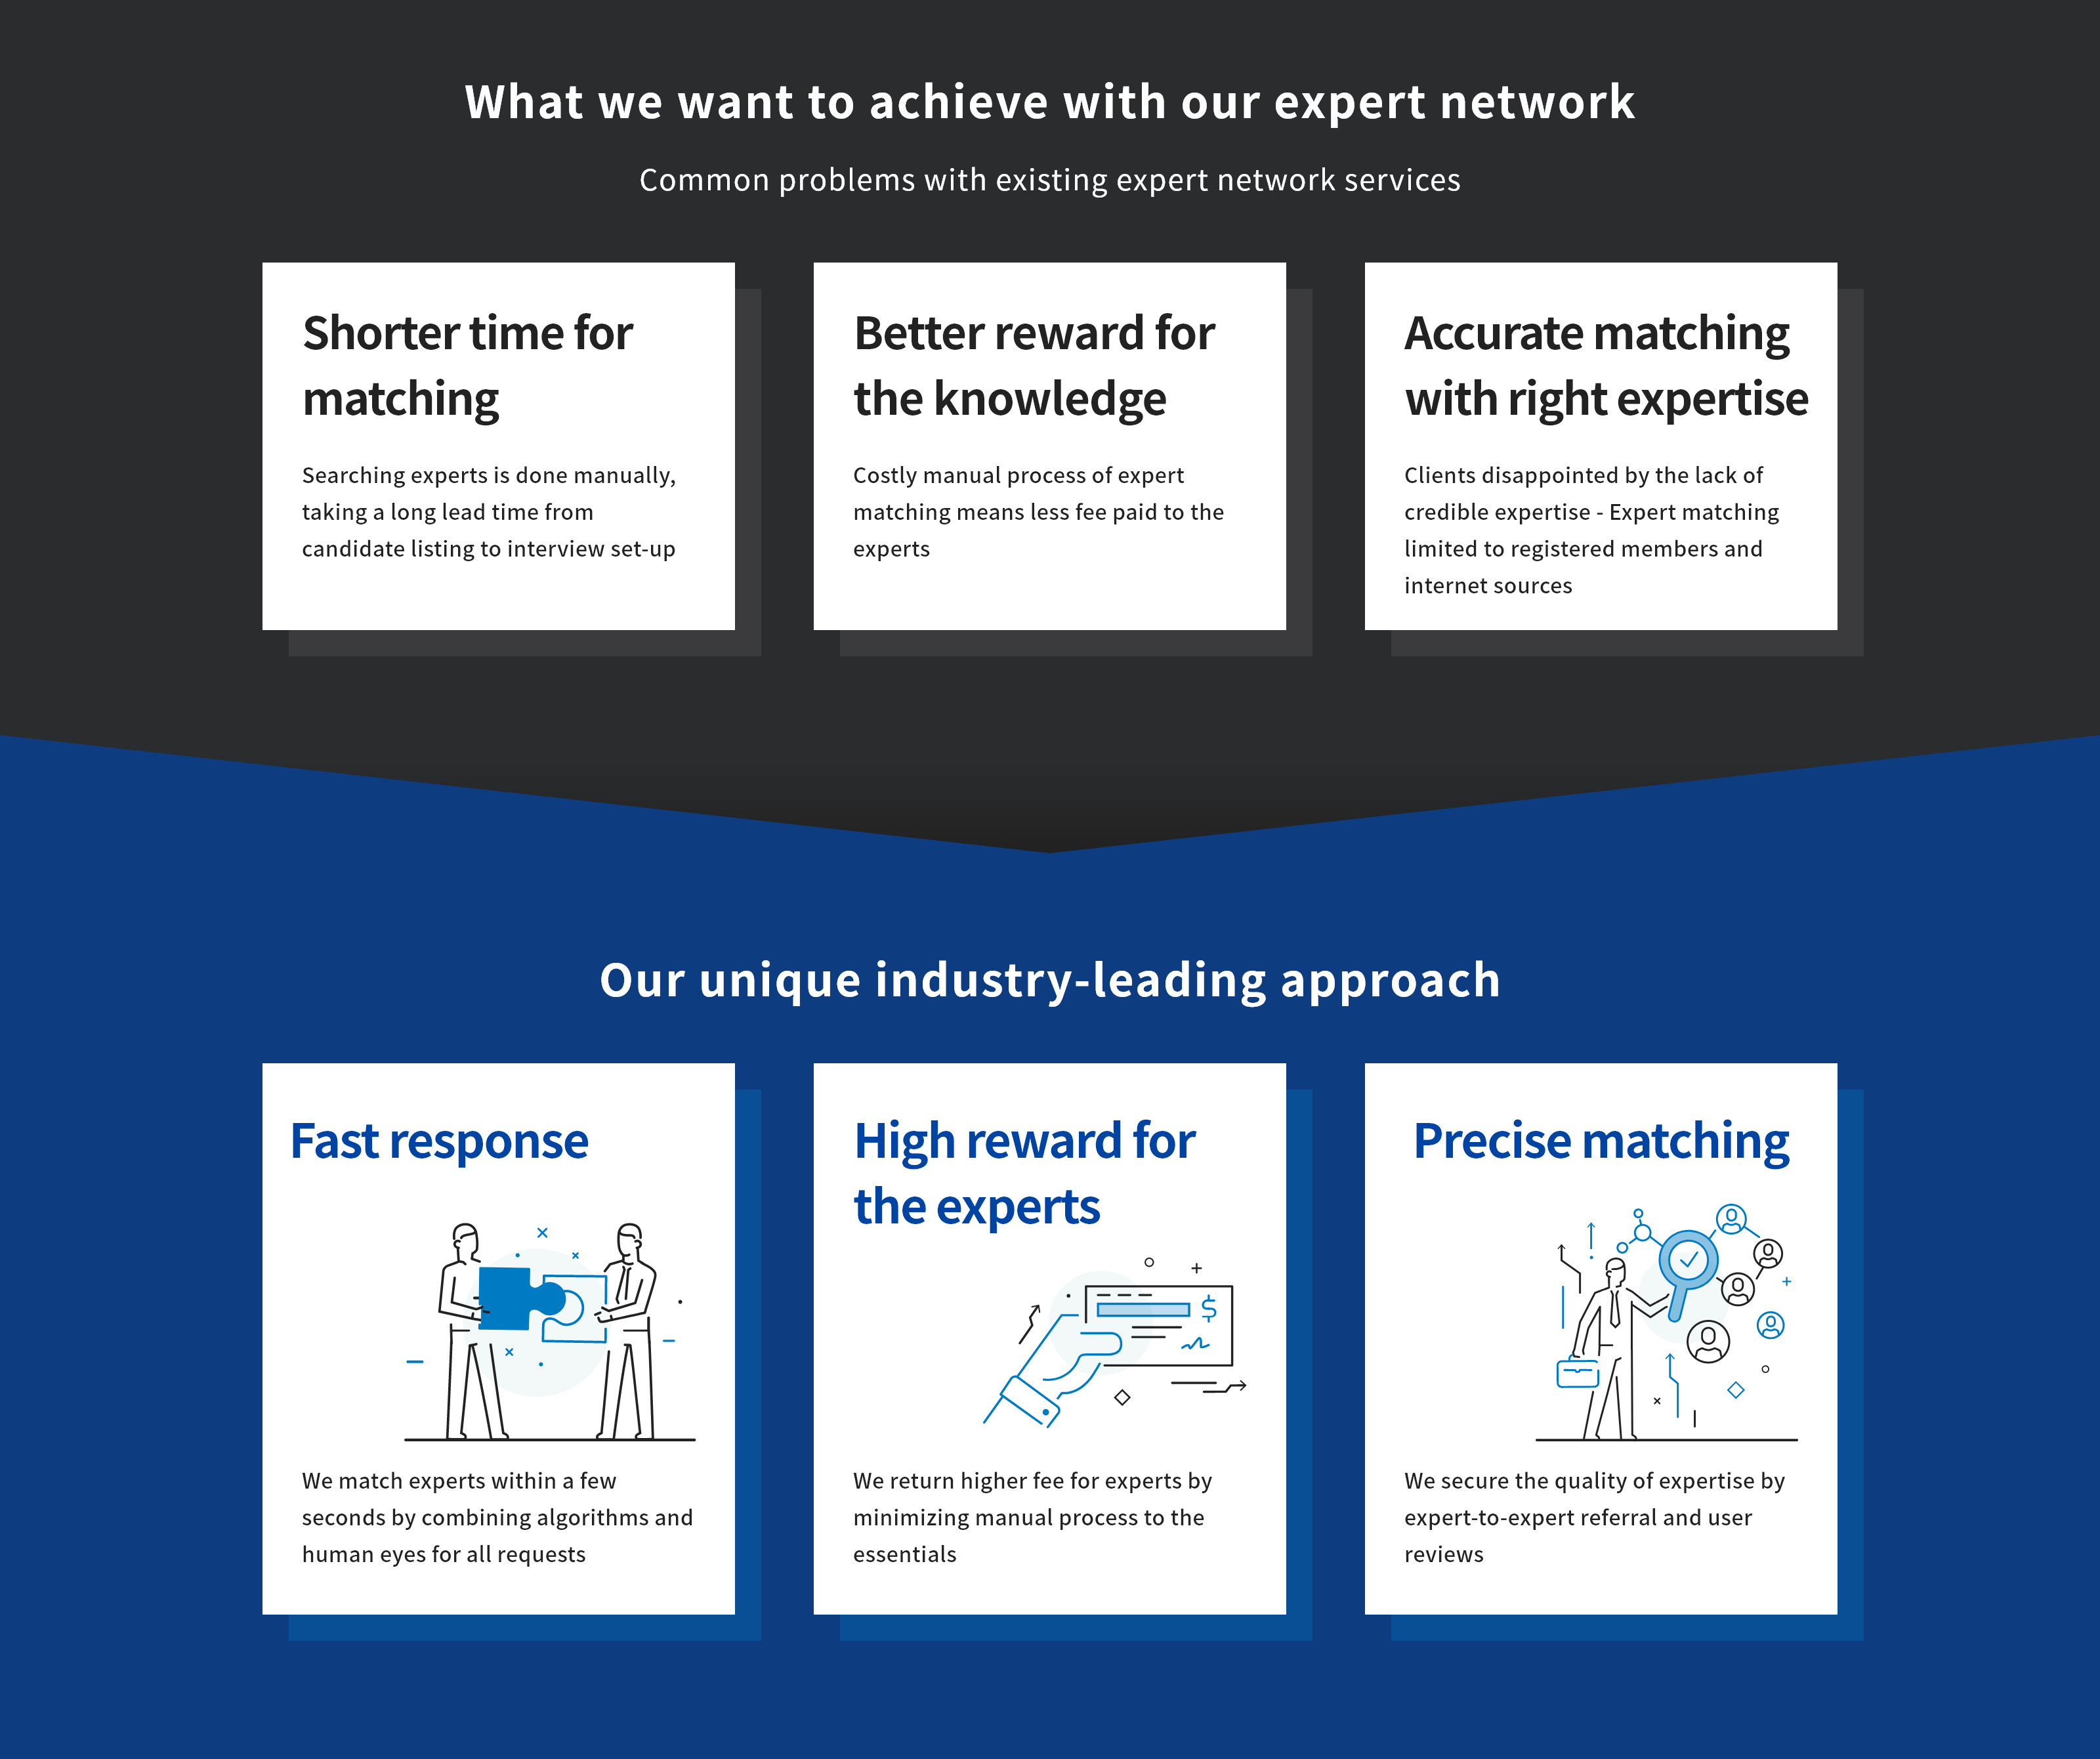 [What we want to achieve with our expert network] "Common problems with expert network services": Shorter time for matching (Searching experts is done manually, taking a long lead time from candidate listing to interview set-up), Better reward for the knowledge (Costly manual process of expert matching means less fee paid to the experts), Accurate matching with right expertise (Clients disappointed by the lack of credible expertise - Expert matching limited to registered members and internet sources). "Our unique industry-leading approach": Fast response (We match experts within a few seconds by combining algorithms and human eyes for all requests), High reward for the experts (We return higher fee for experts by minimizing manual process to the essentials), Precise matching (We secure the quality of expertise bby expert-to-expert referral and user reviews).